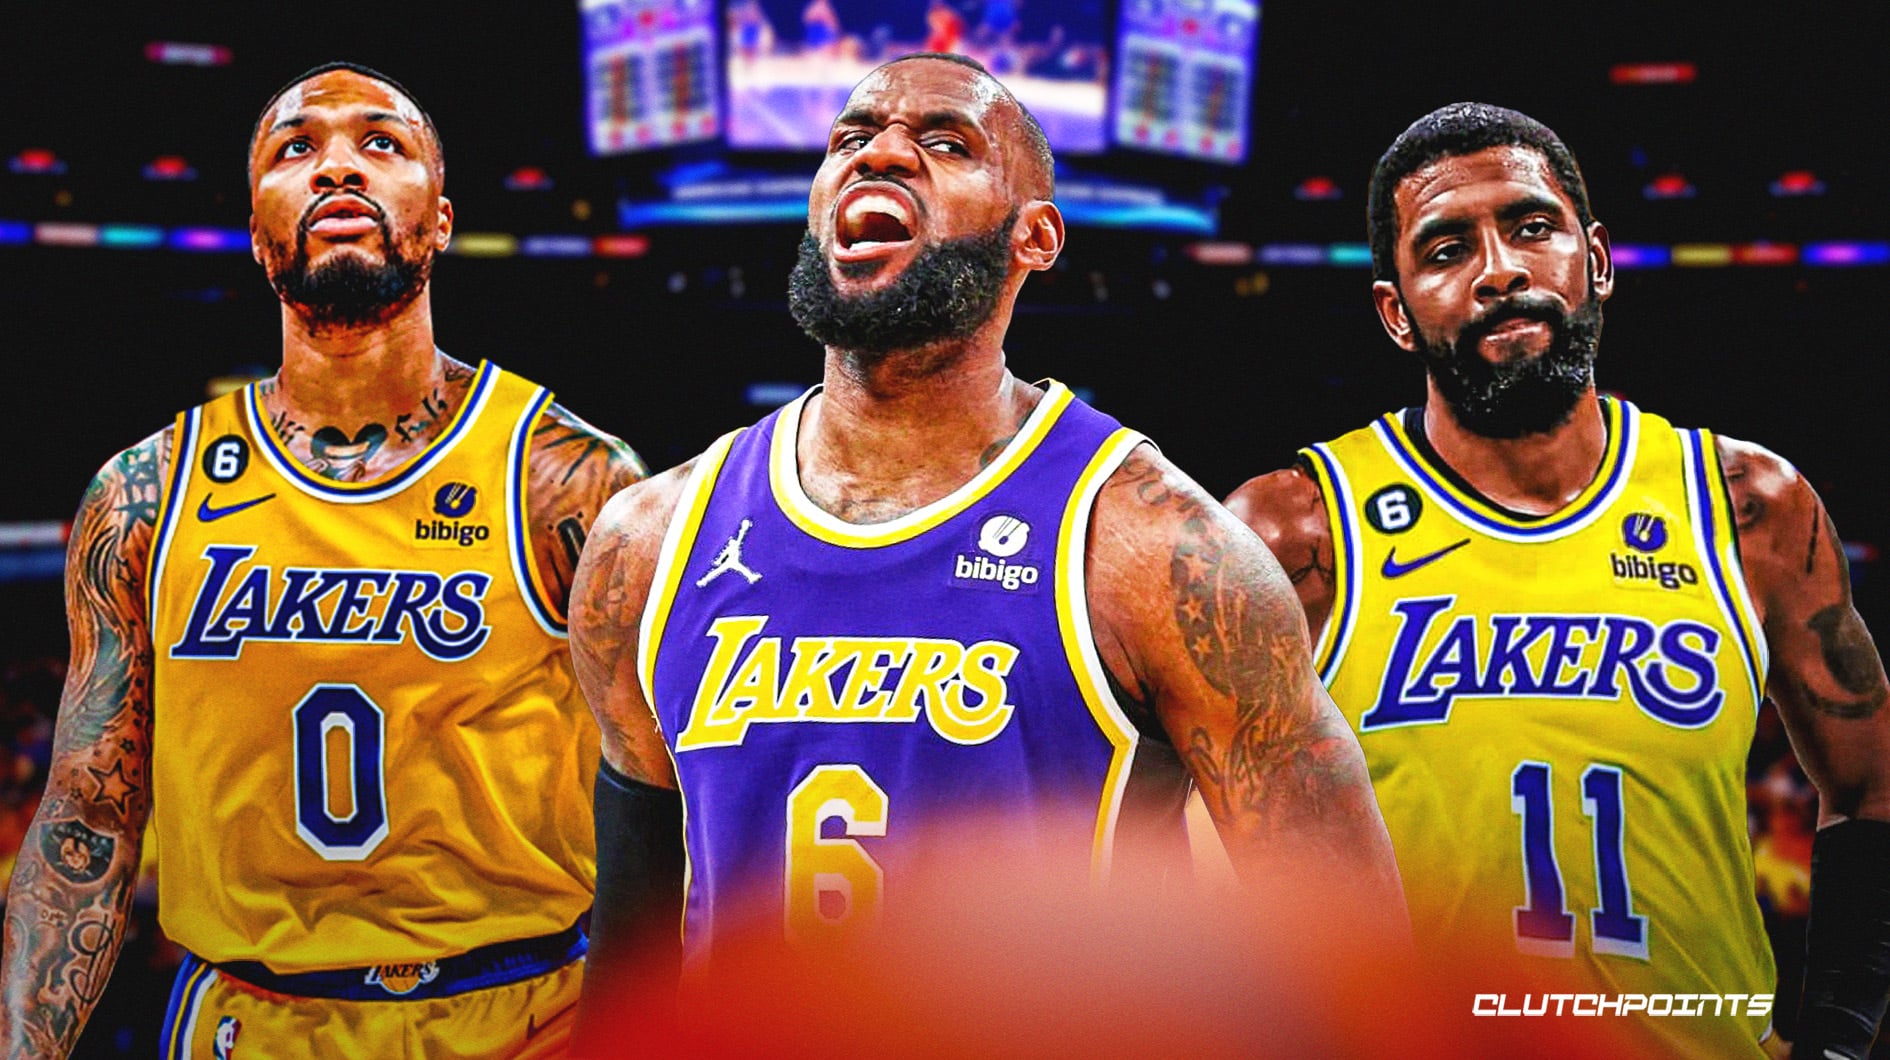 LeBron says playing for a 'historic franchise' helped to draw him to Lakers